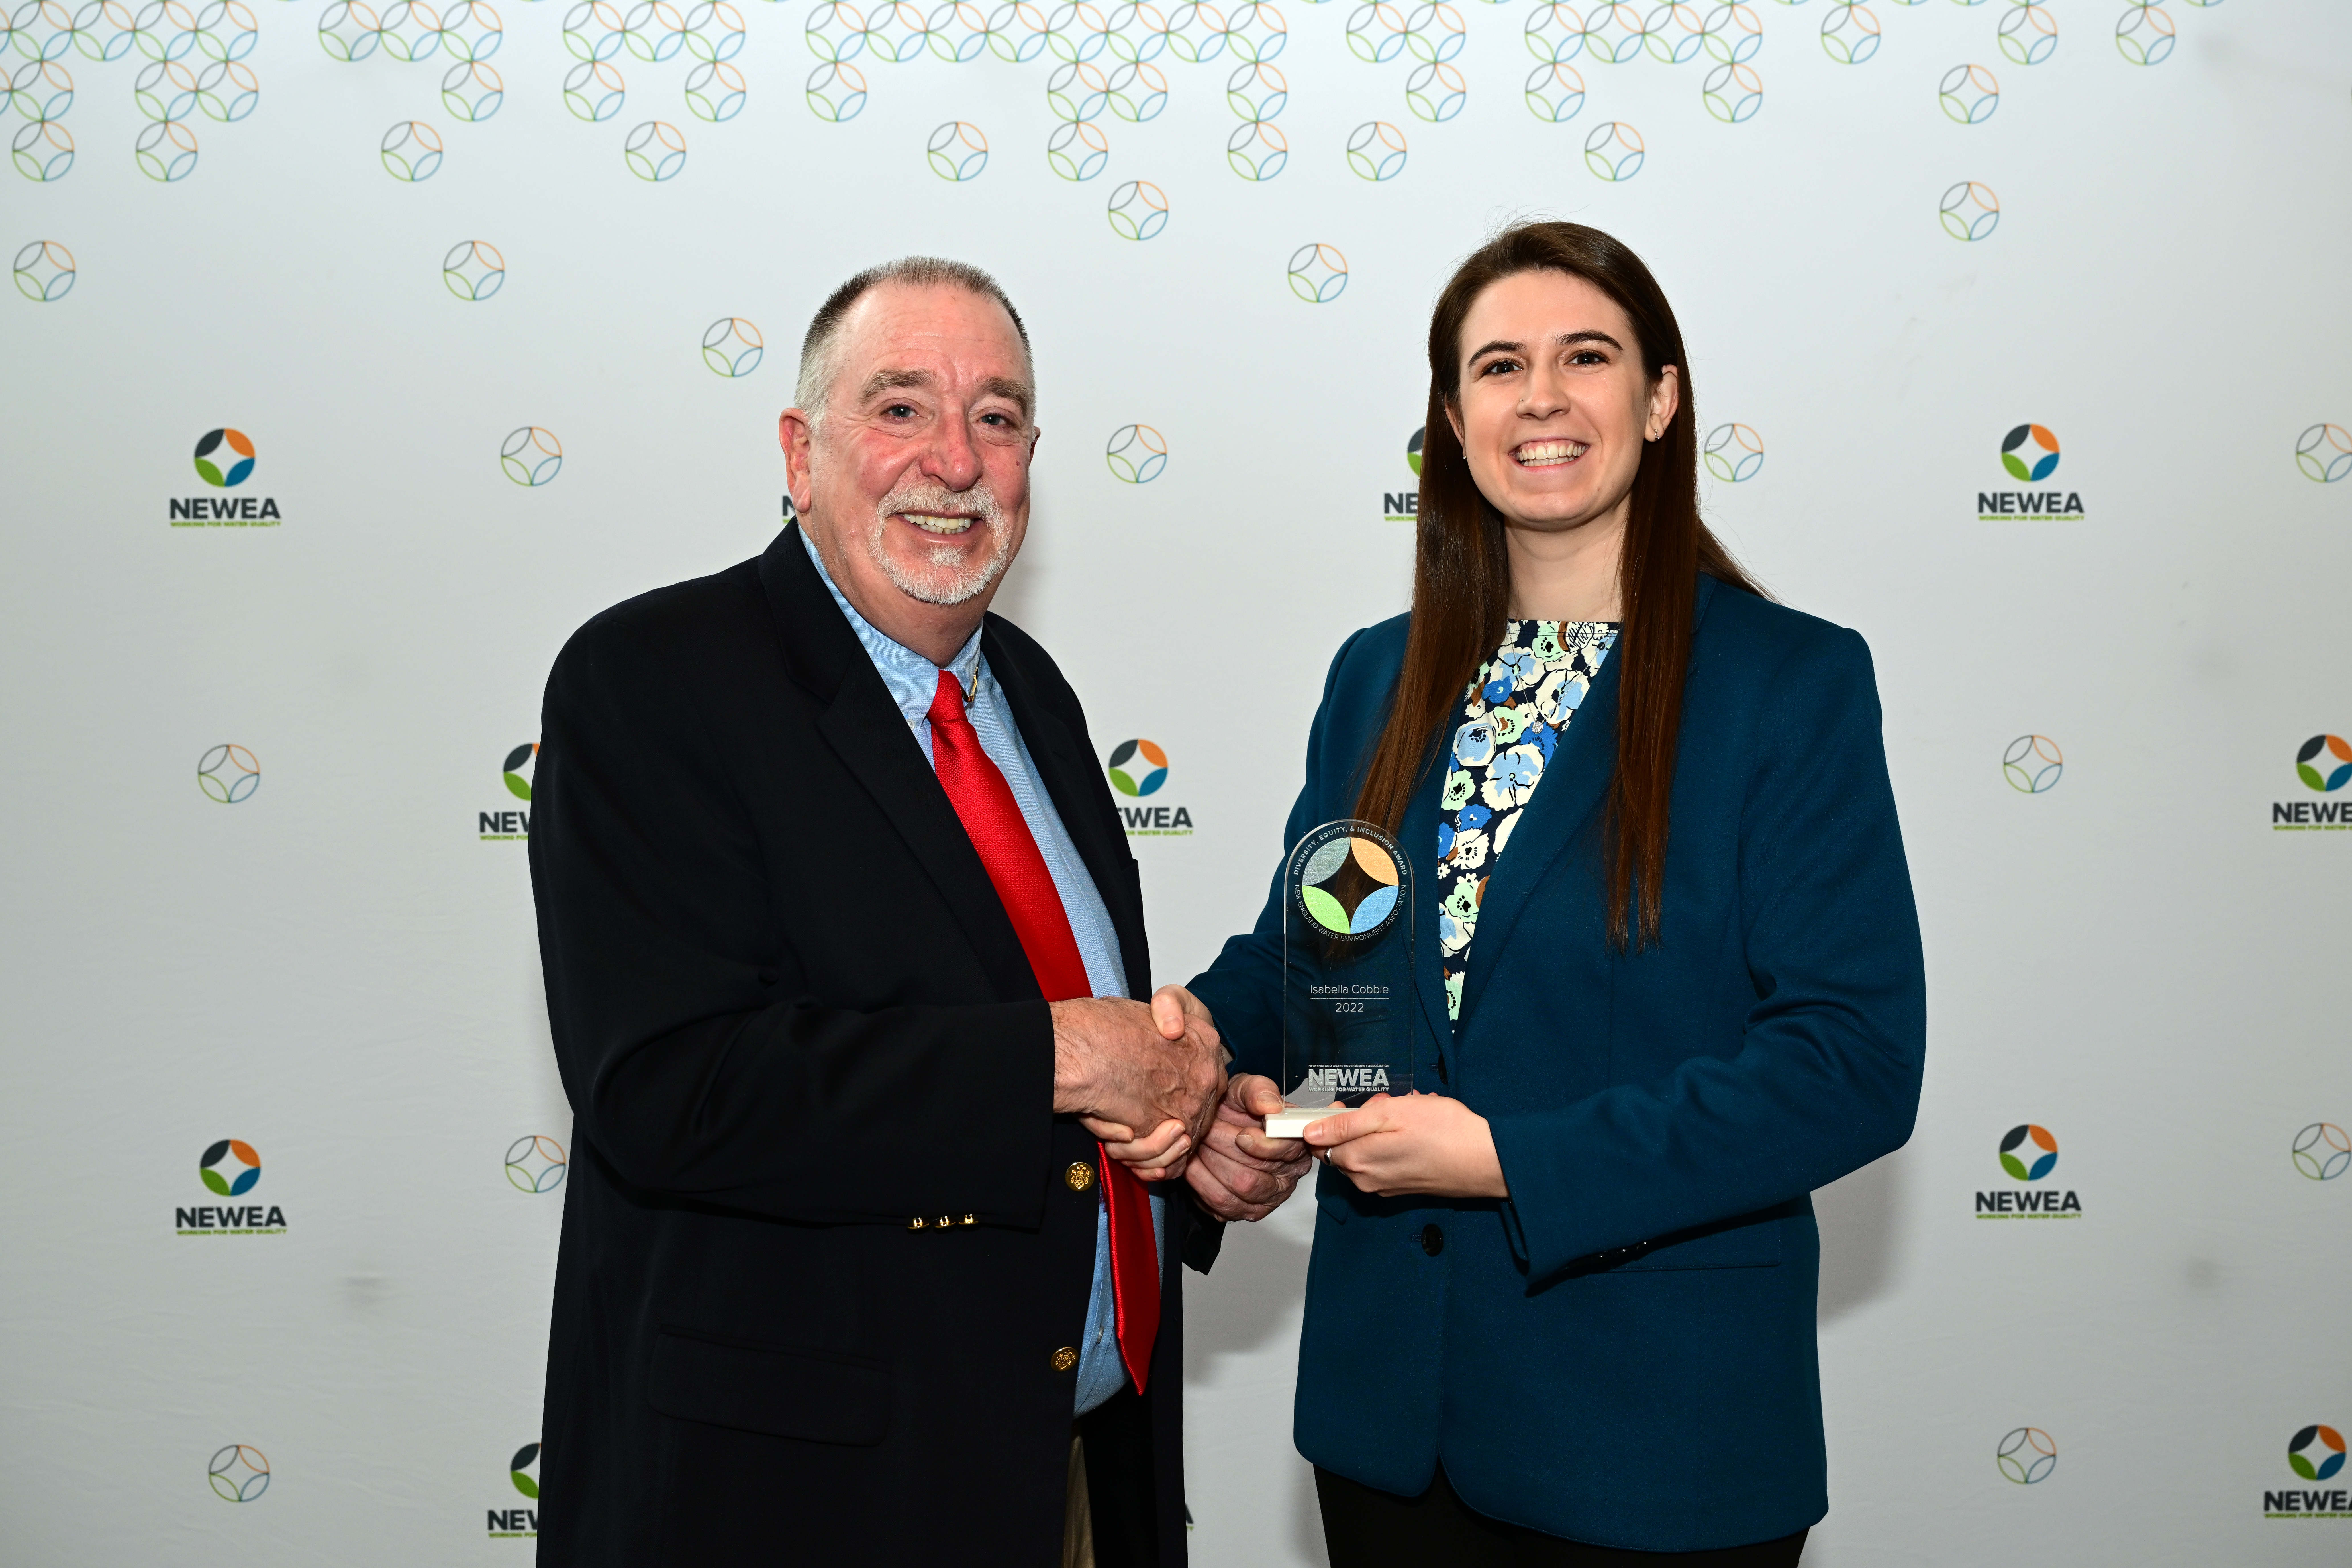 Isabella Cobble receives the 2023 Diversity, Equity, and Inclusion Award at NEWEA 2023. Photo Credit: Cindy Loo